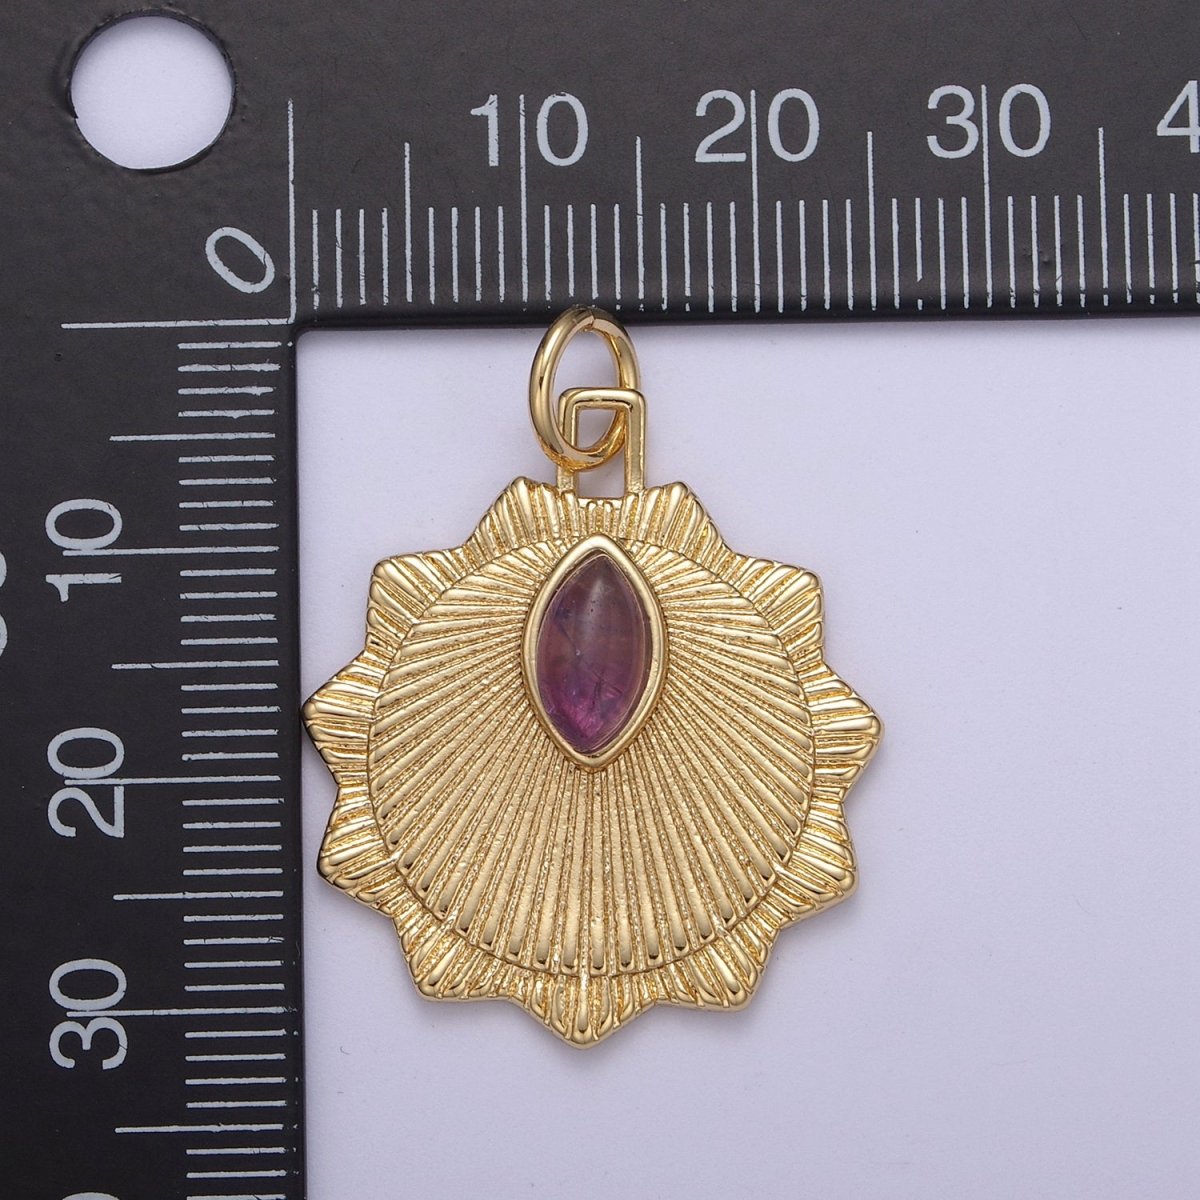 Radial Sun Token Medallion Charm Pendant for Necklace with Amethyst Gemstone N-399 - DLUXCA